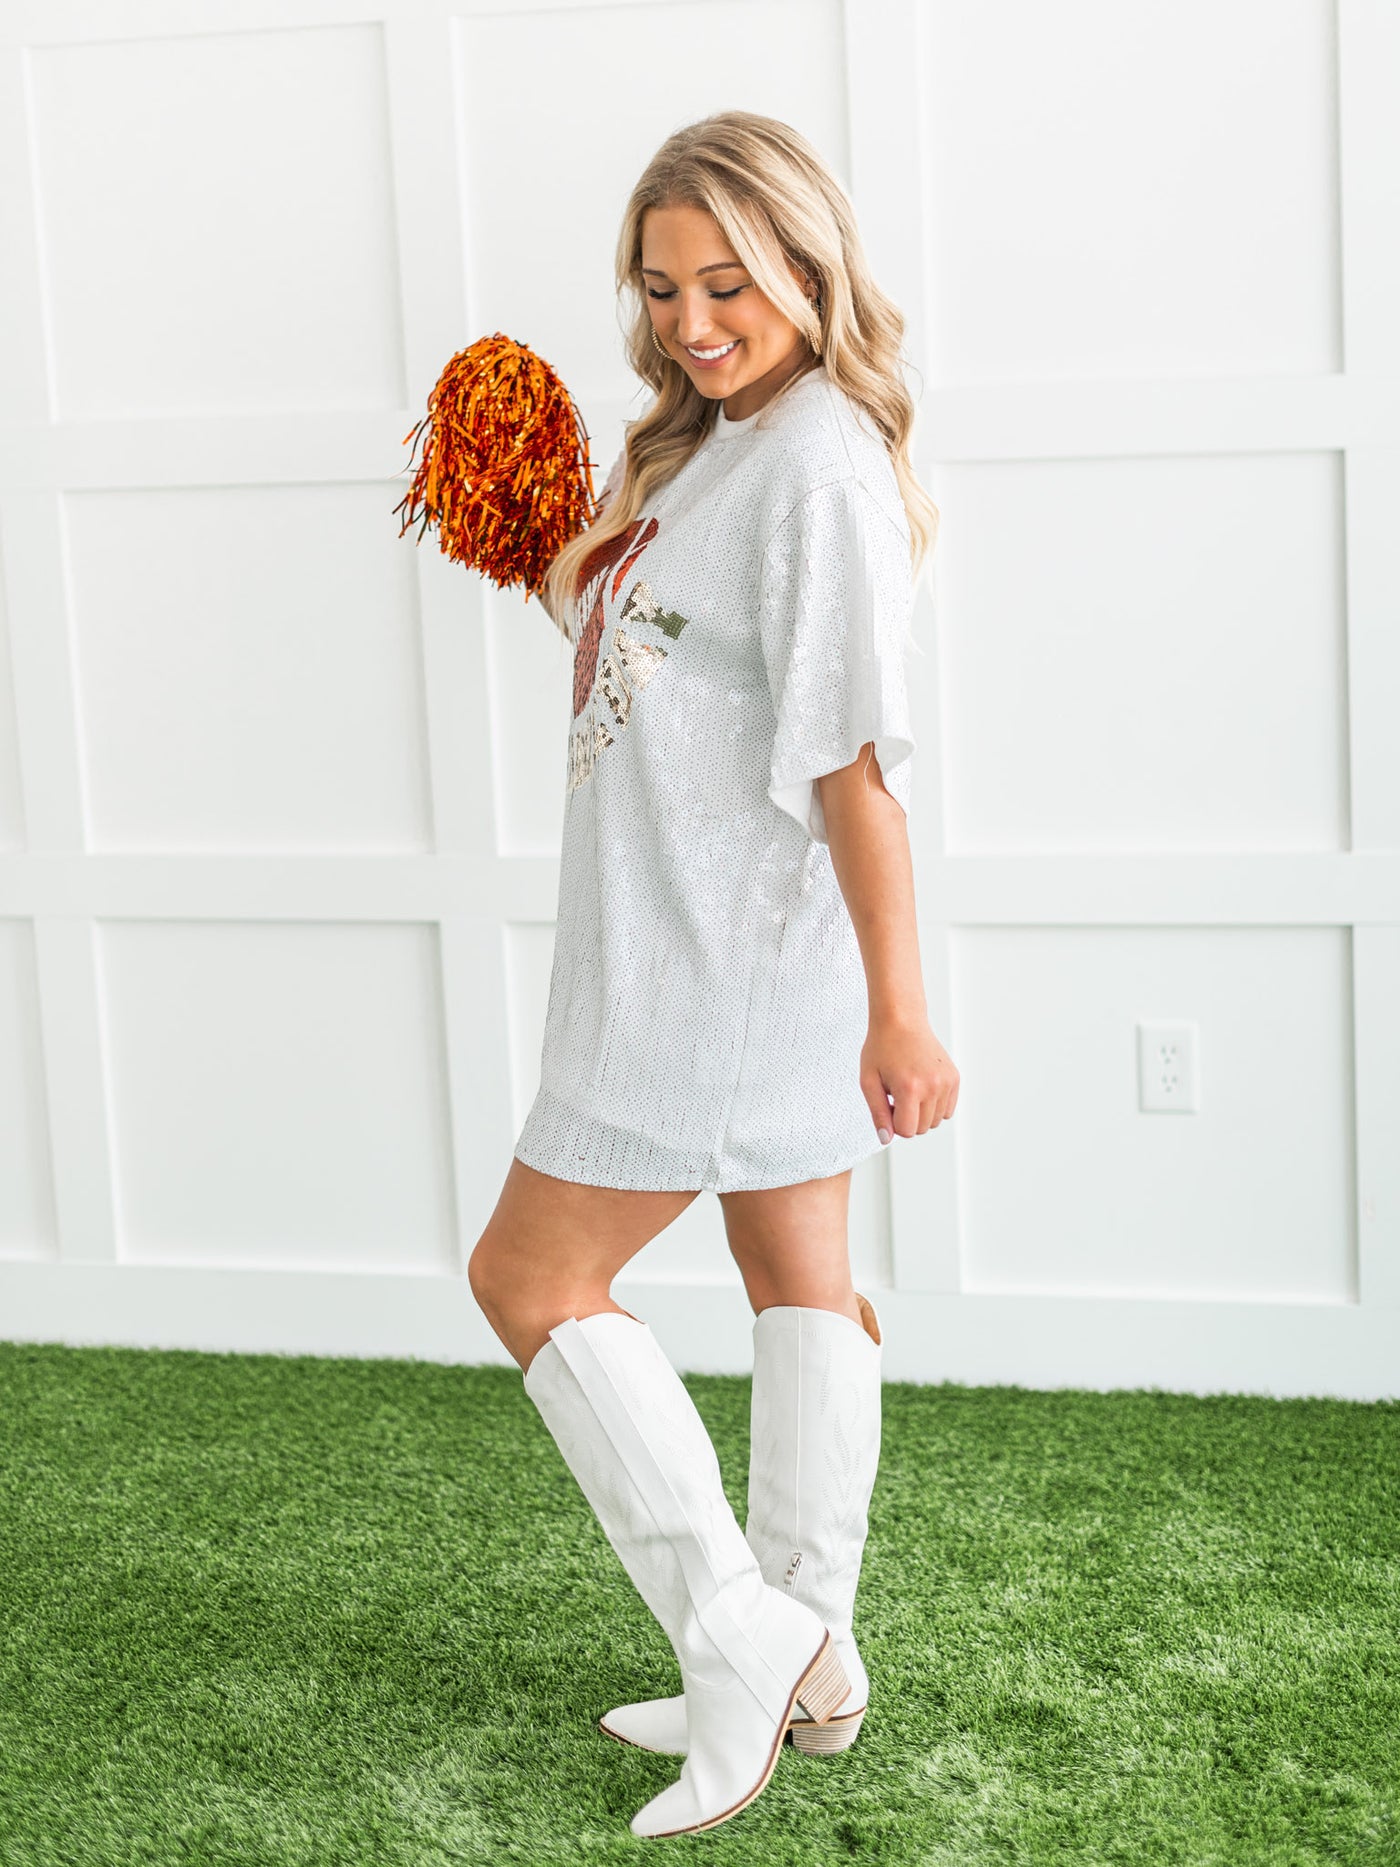 Bring the Sparkle Gameday Sequin Dress